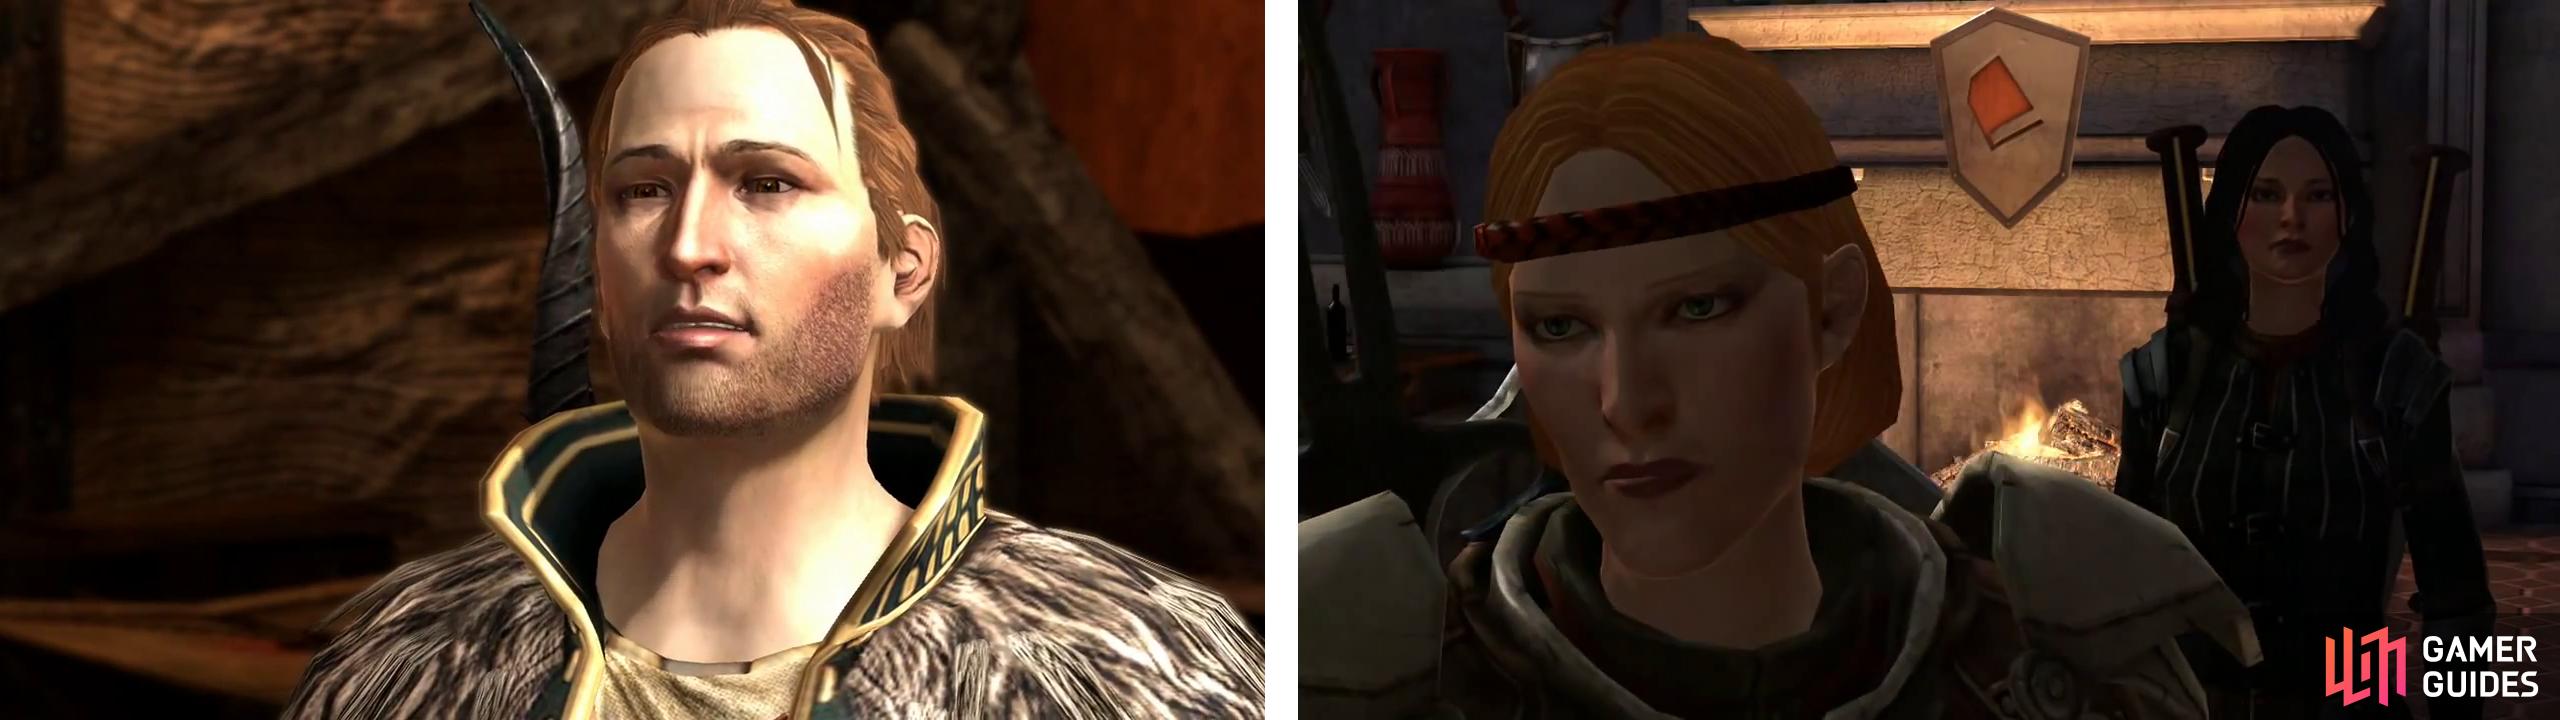 Anders (left) and Aveline (right).